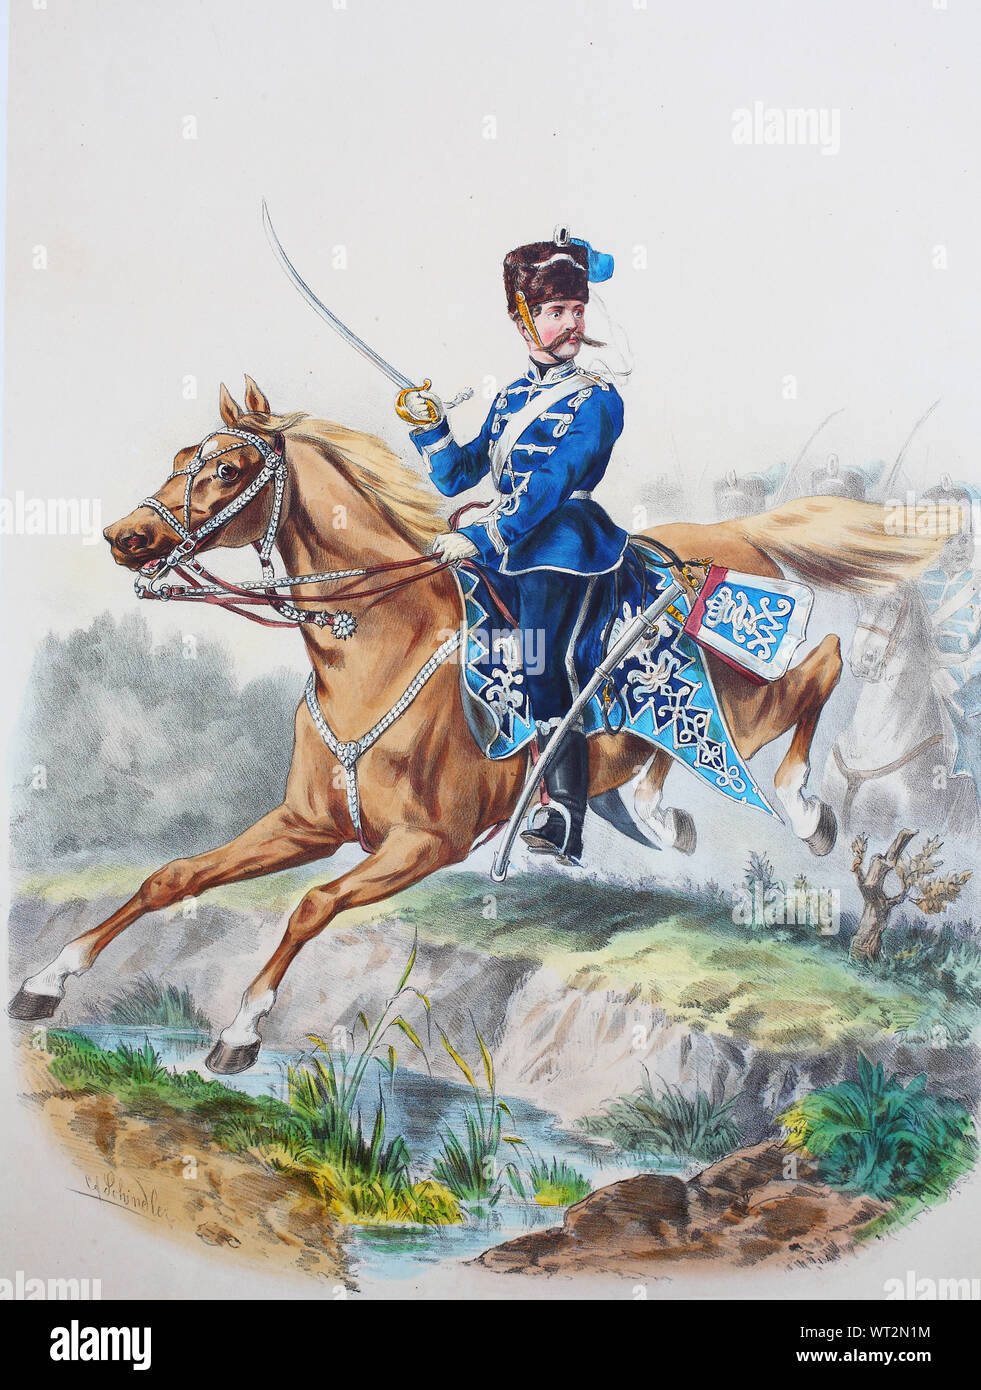 Royal Prussian Army, Guards Corps, Preußens Heer, preussische Garde, Westfälisches Husaren Regiment No.8, Offizier, Digital improved reproduction of an illustration from the 19th century Stock Photo